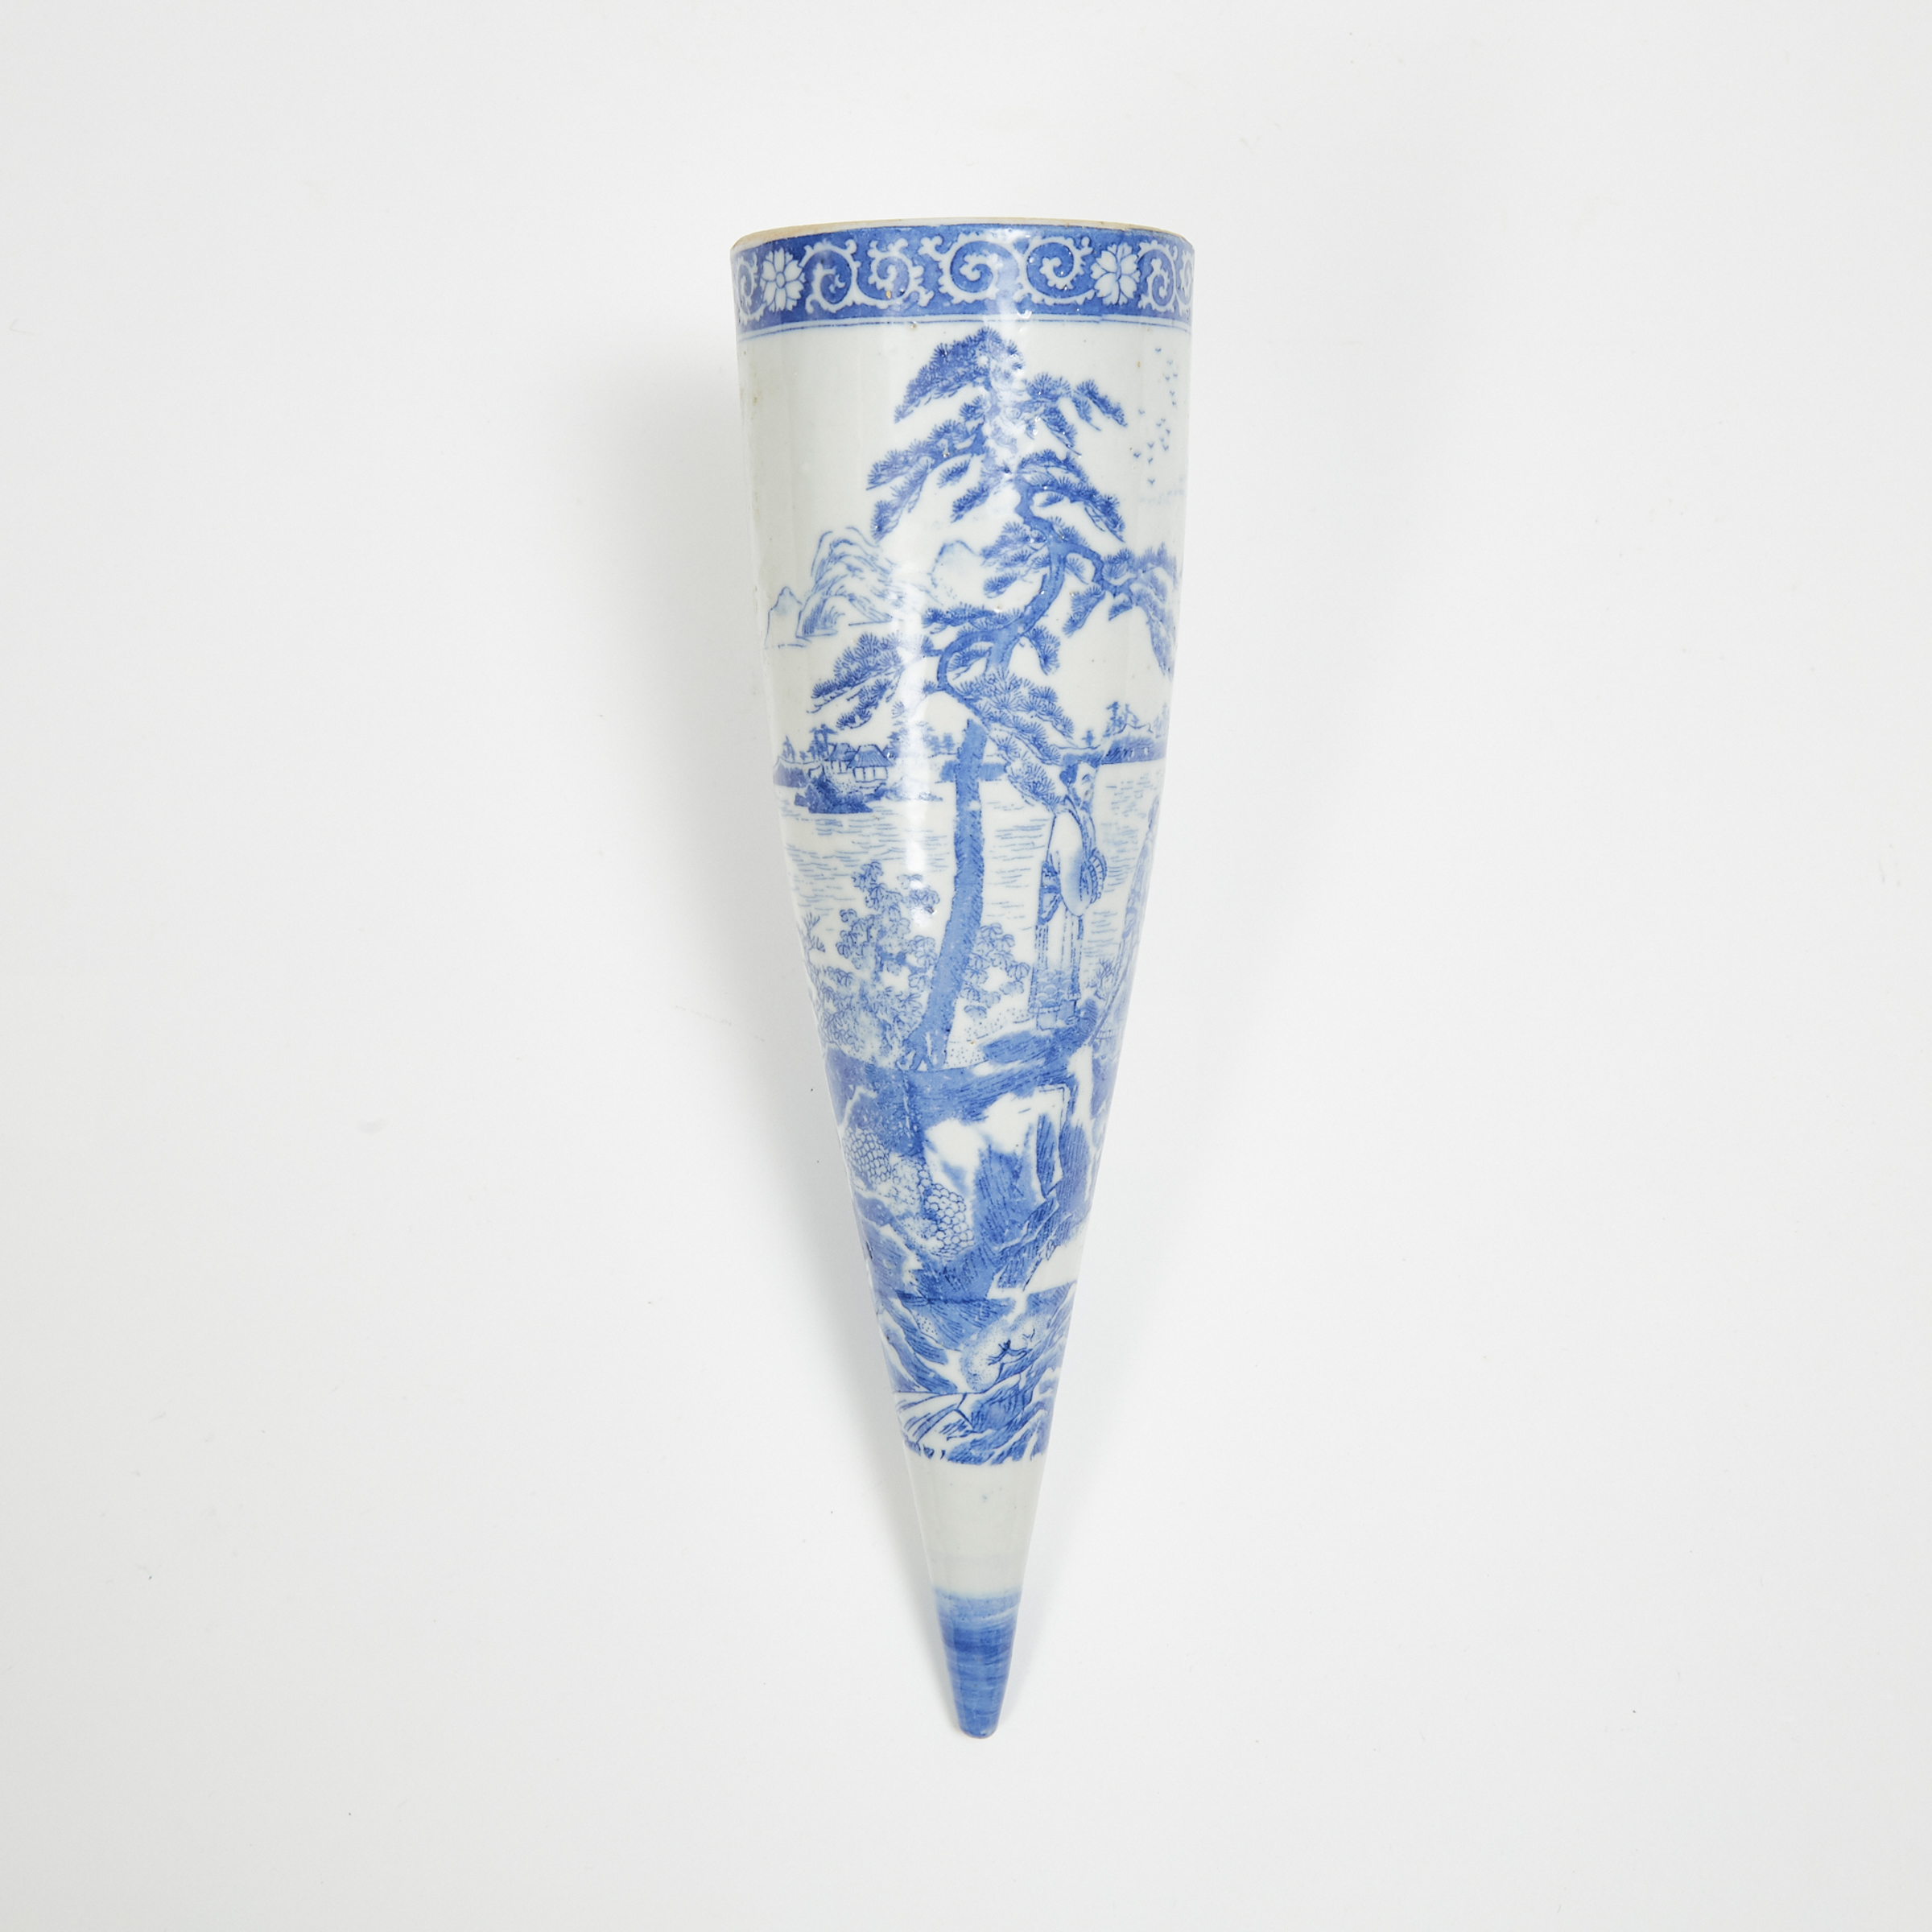 A Blue and White Transferware Porcelain Wall Pocket, 17th Century 